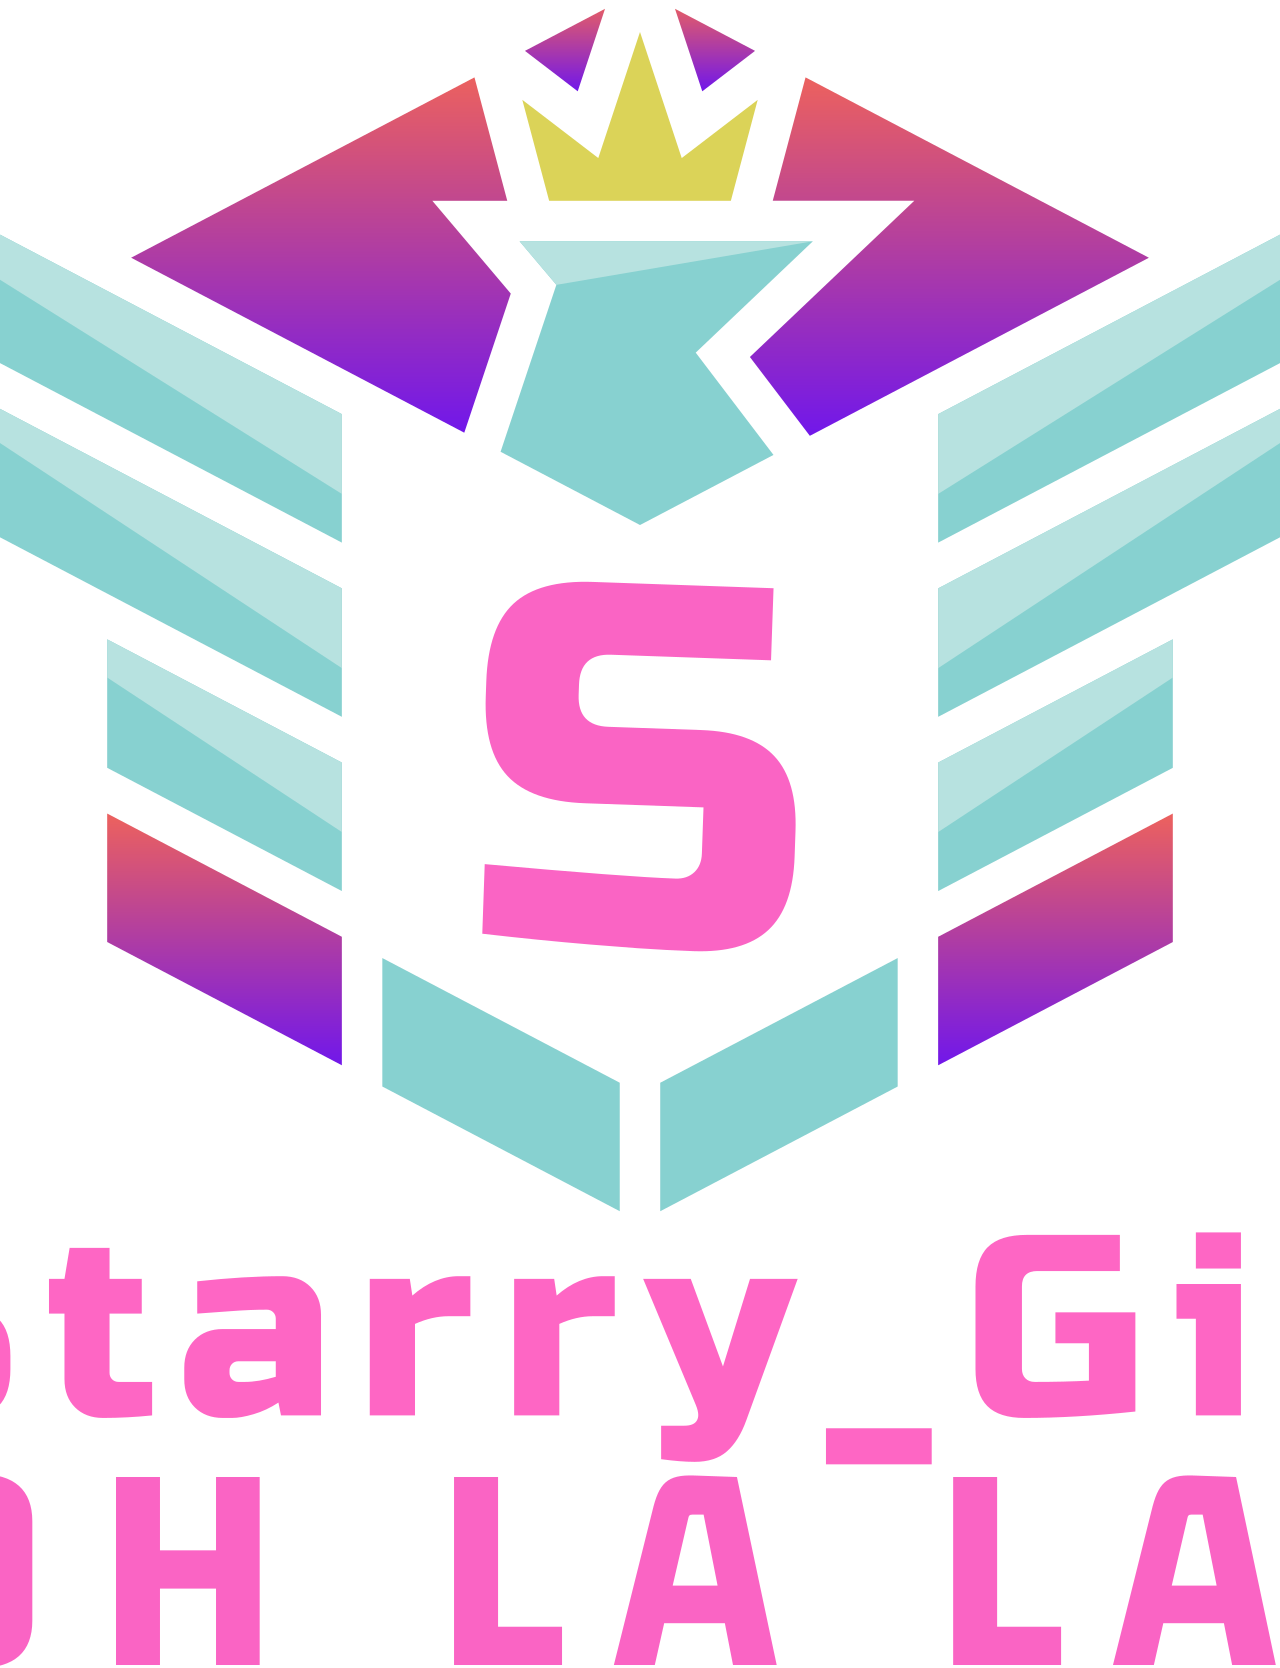 Starry_Gie's web page